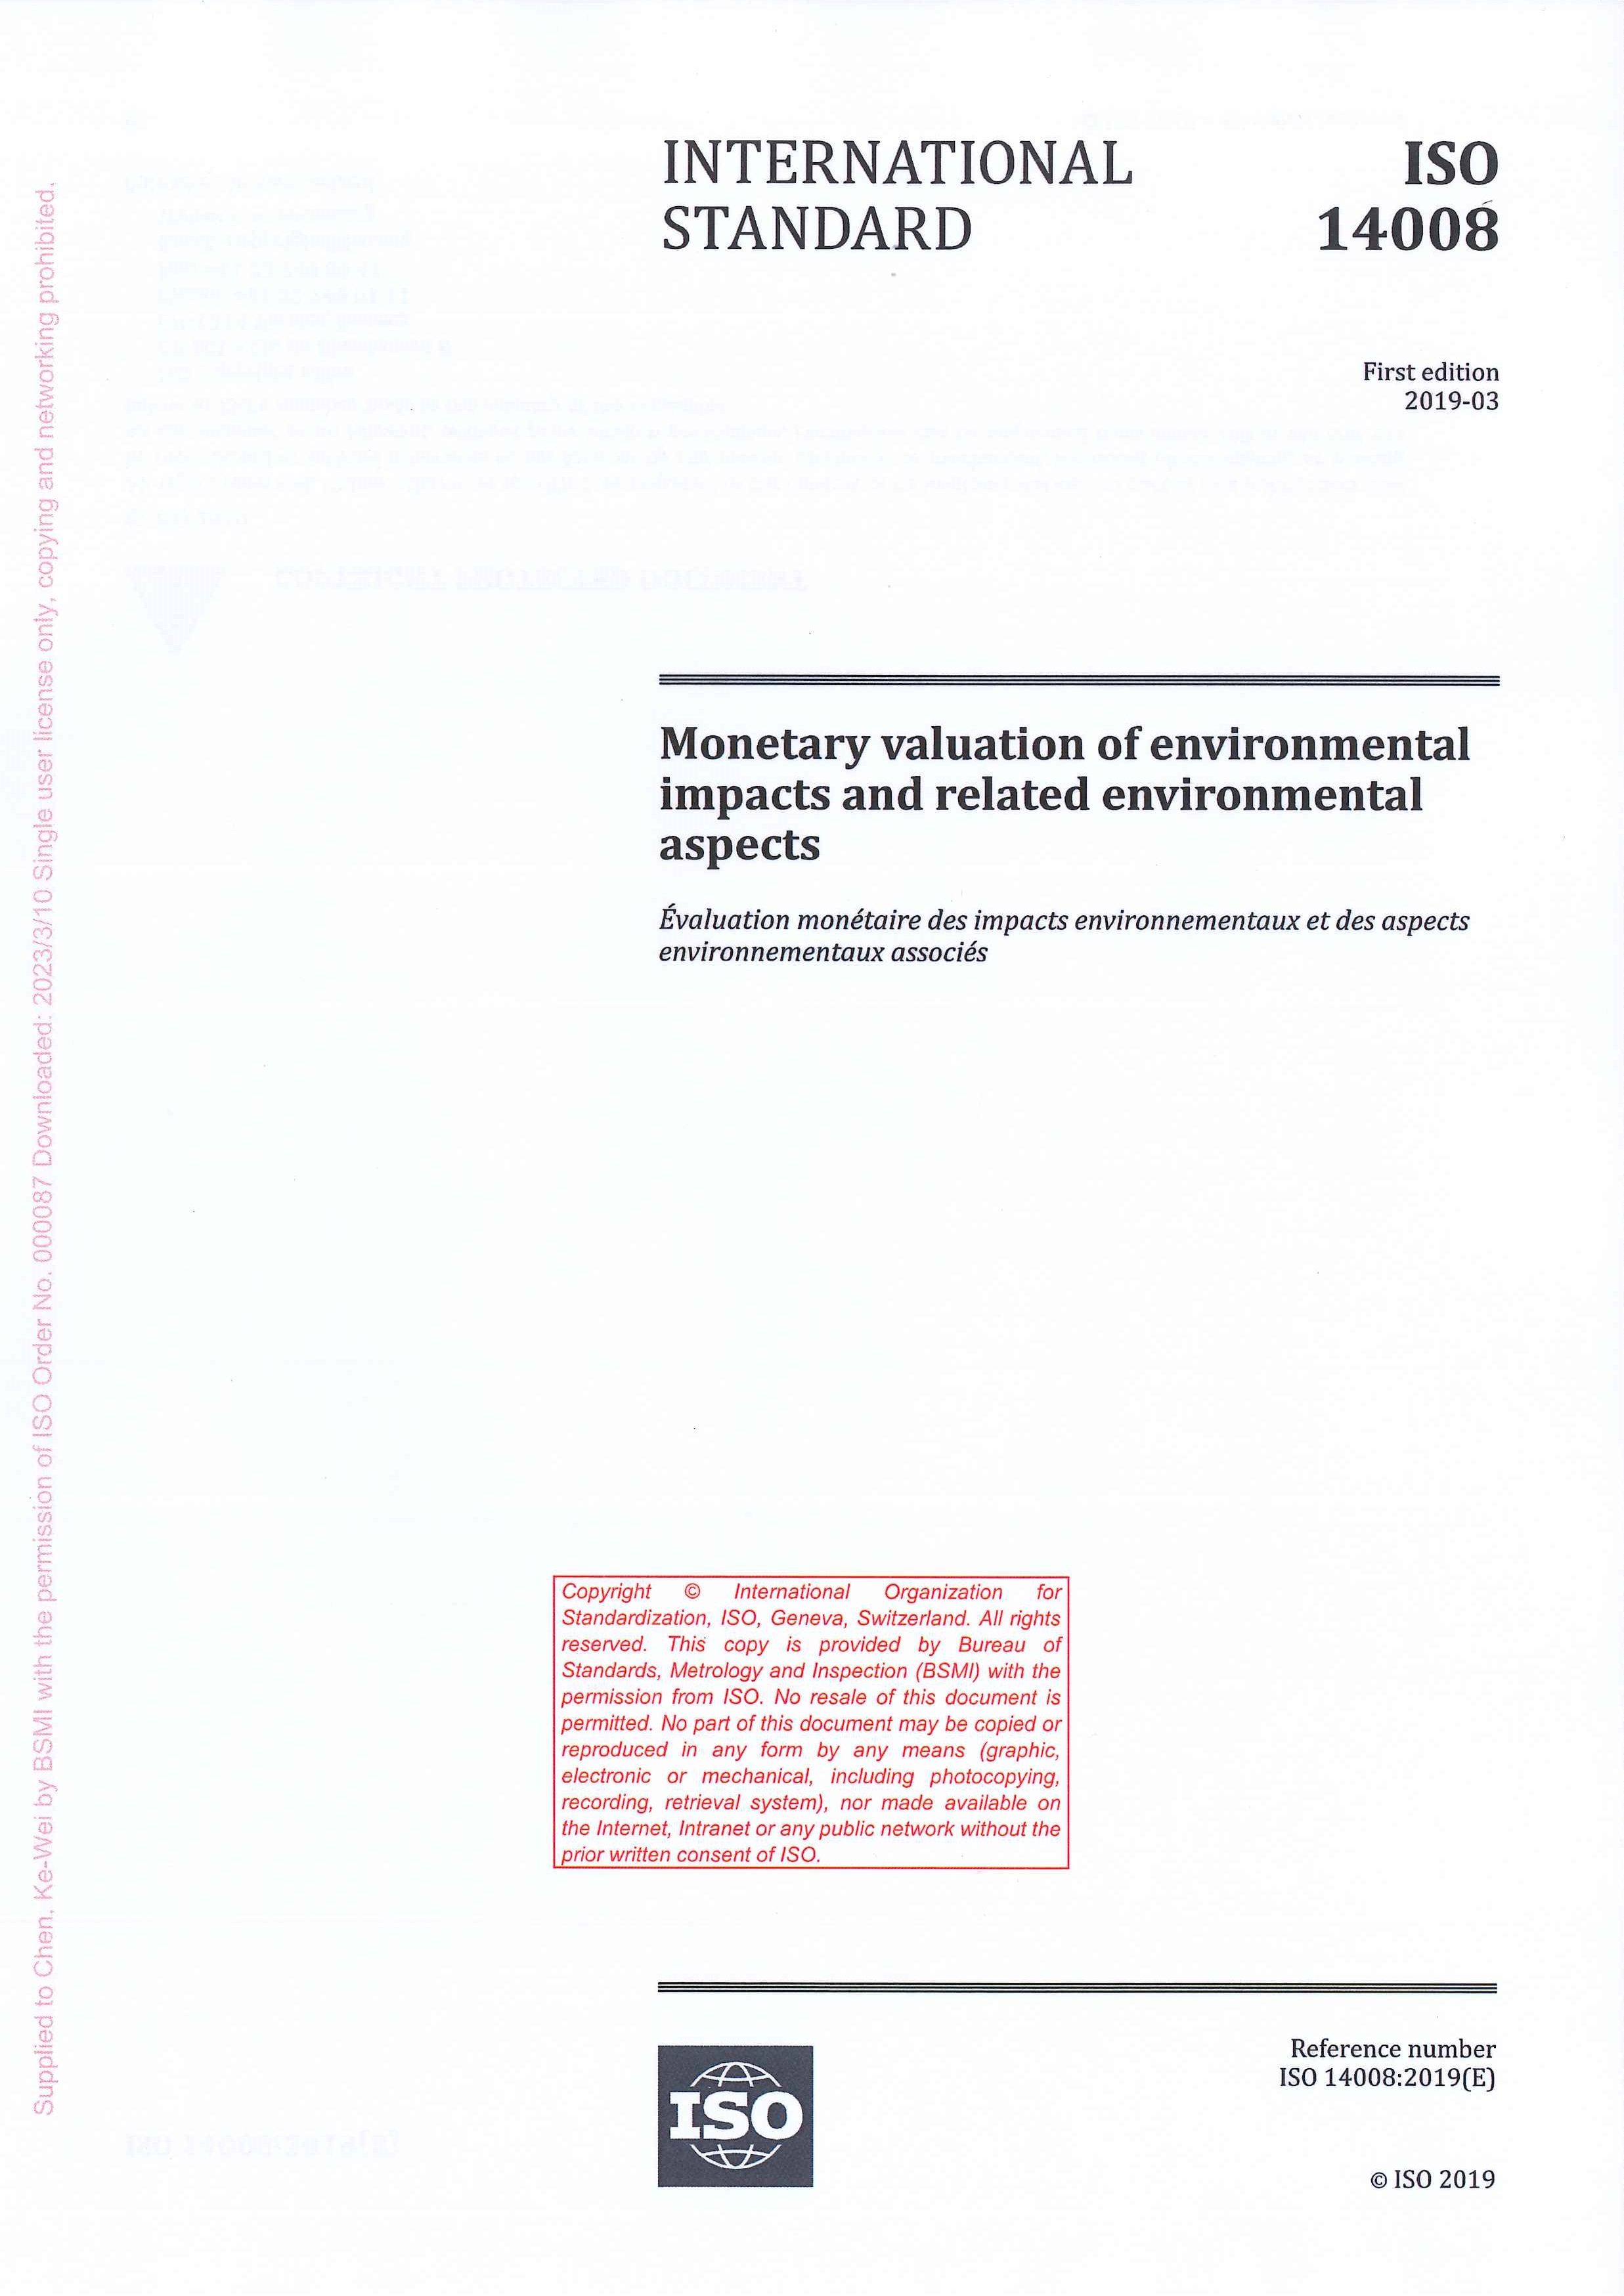 Monetary valuation of environmental impacts and related environmental aspects [e-book]